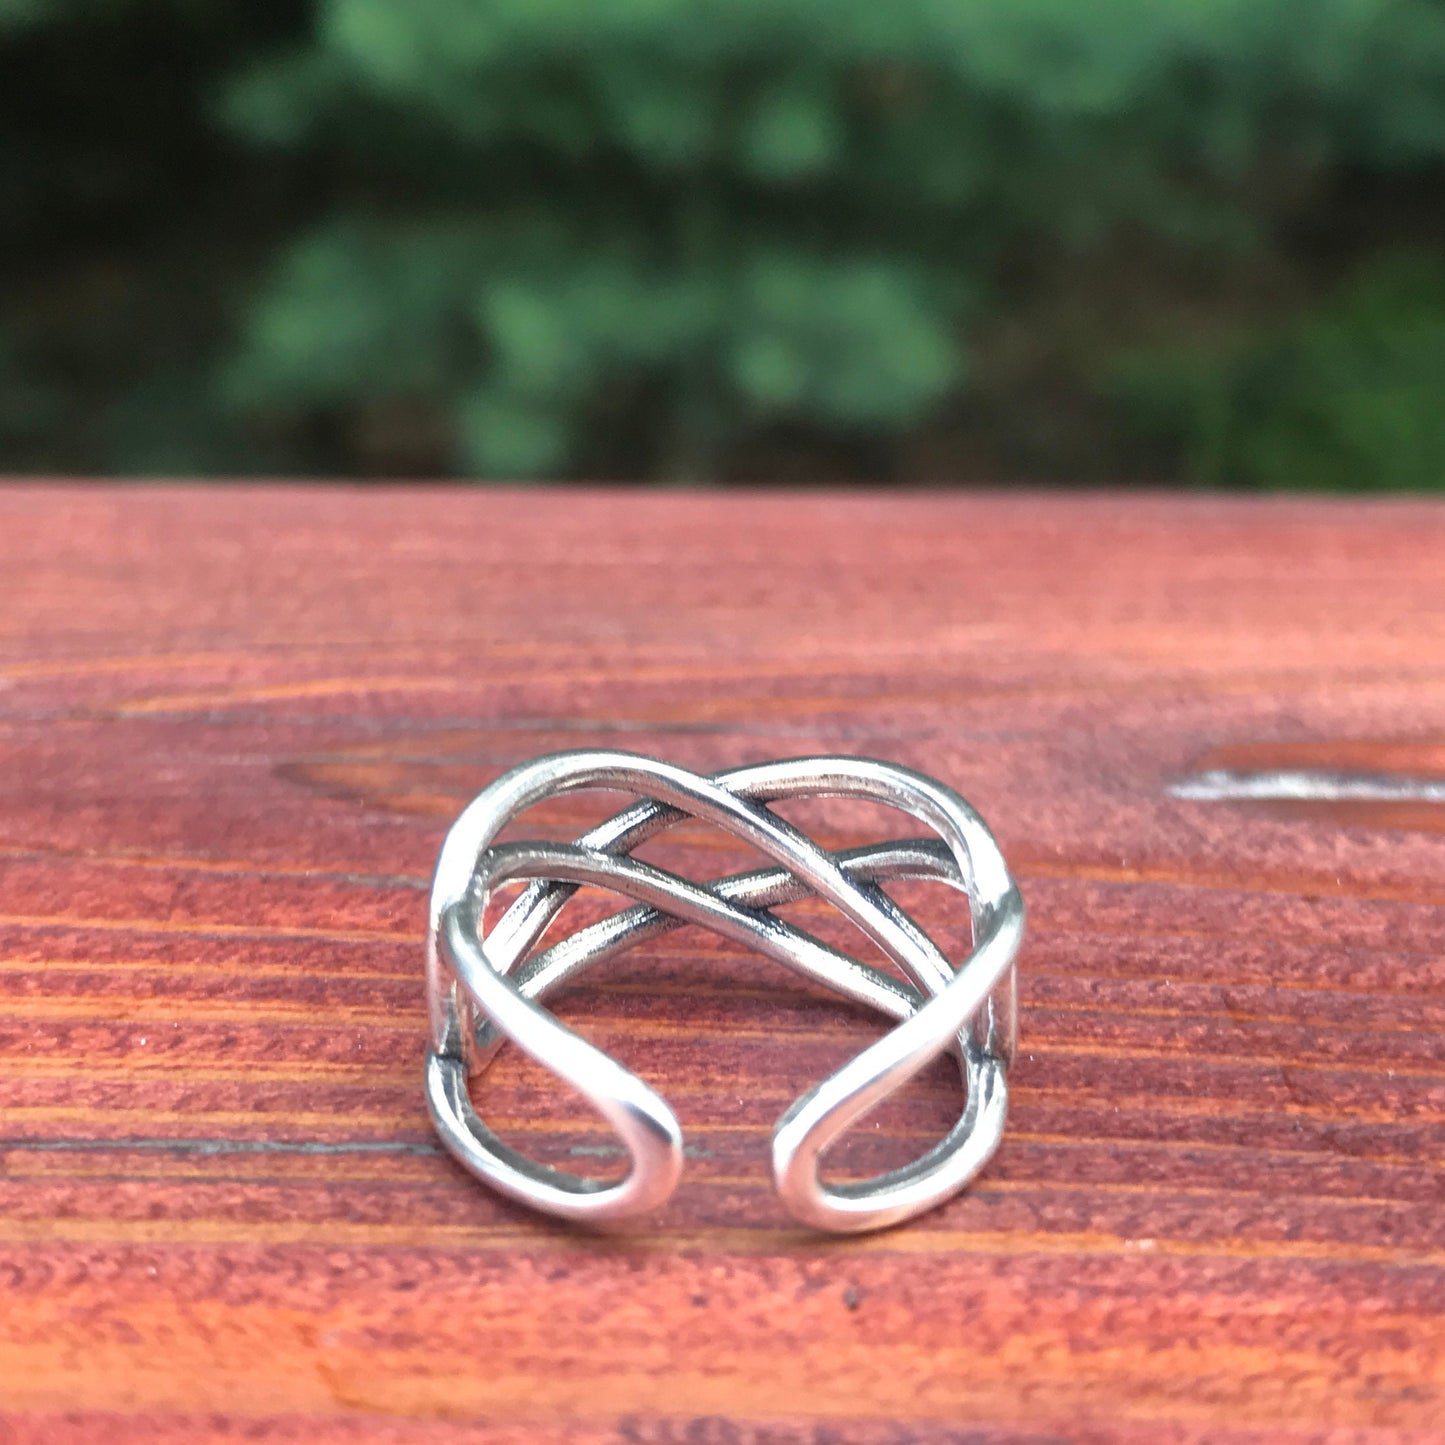 Adjustable Stainless Steel Ring, Celtic Love Knot, Silver Criss Cross Ring, Thumb Ring, Unisex Jewelry, Non Tarnish, Waterproof